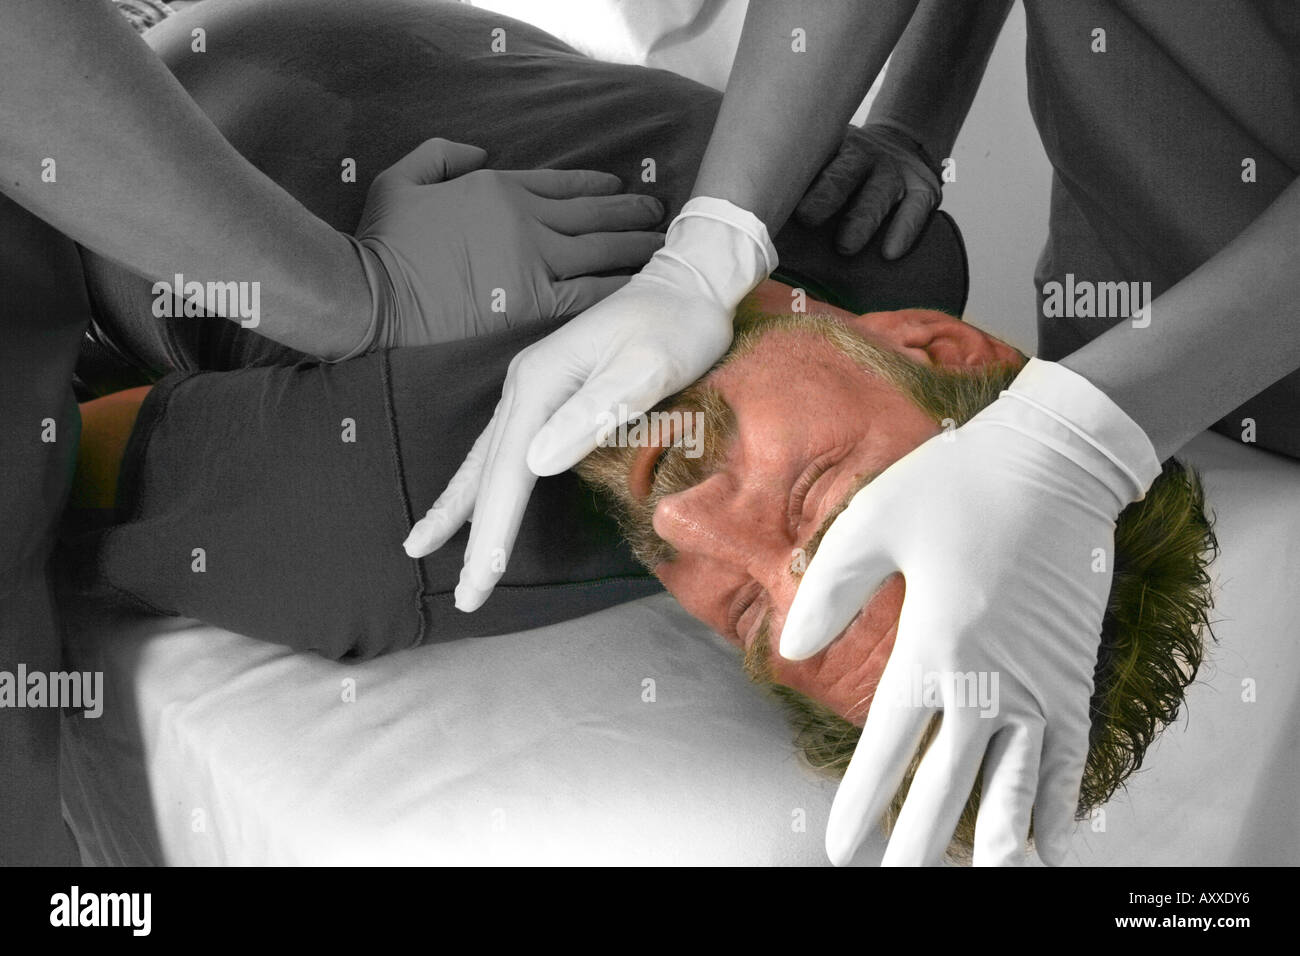 Psychiatry attendees restrain a patient. Stock Photo